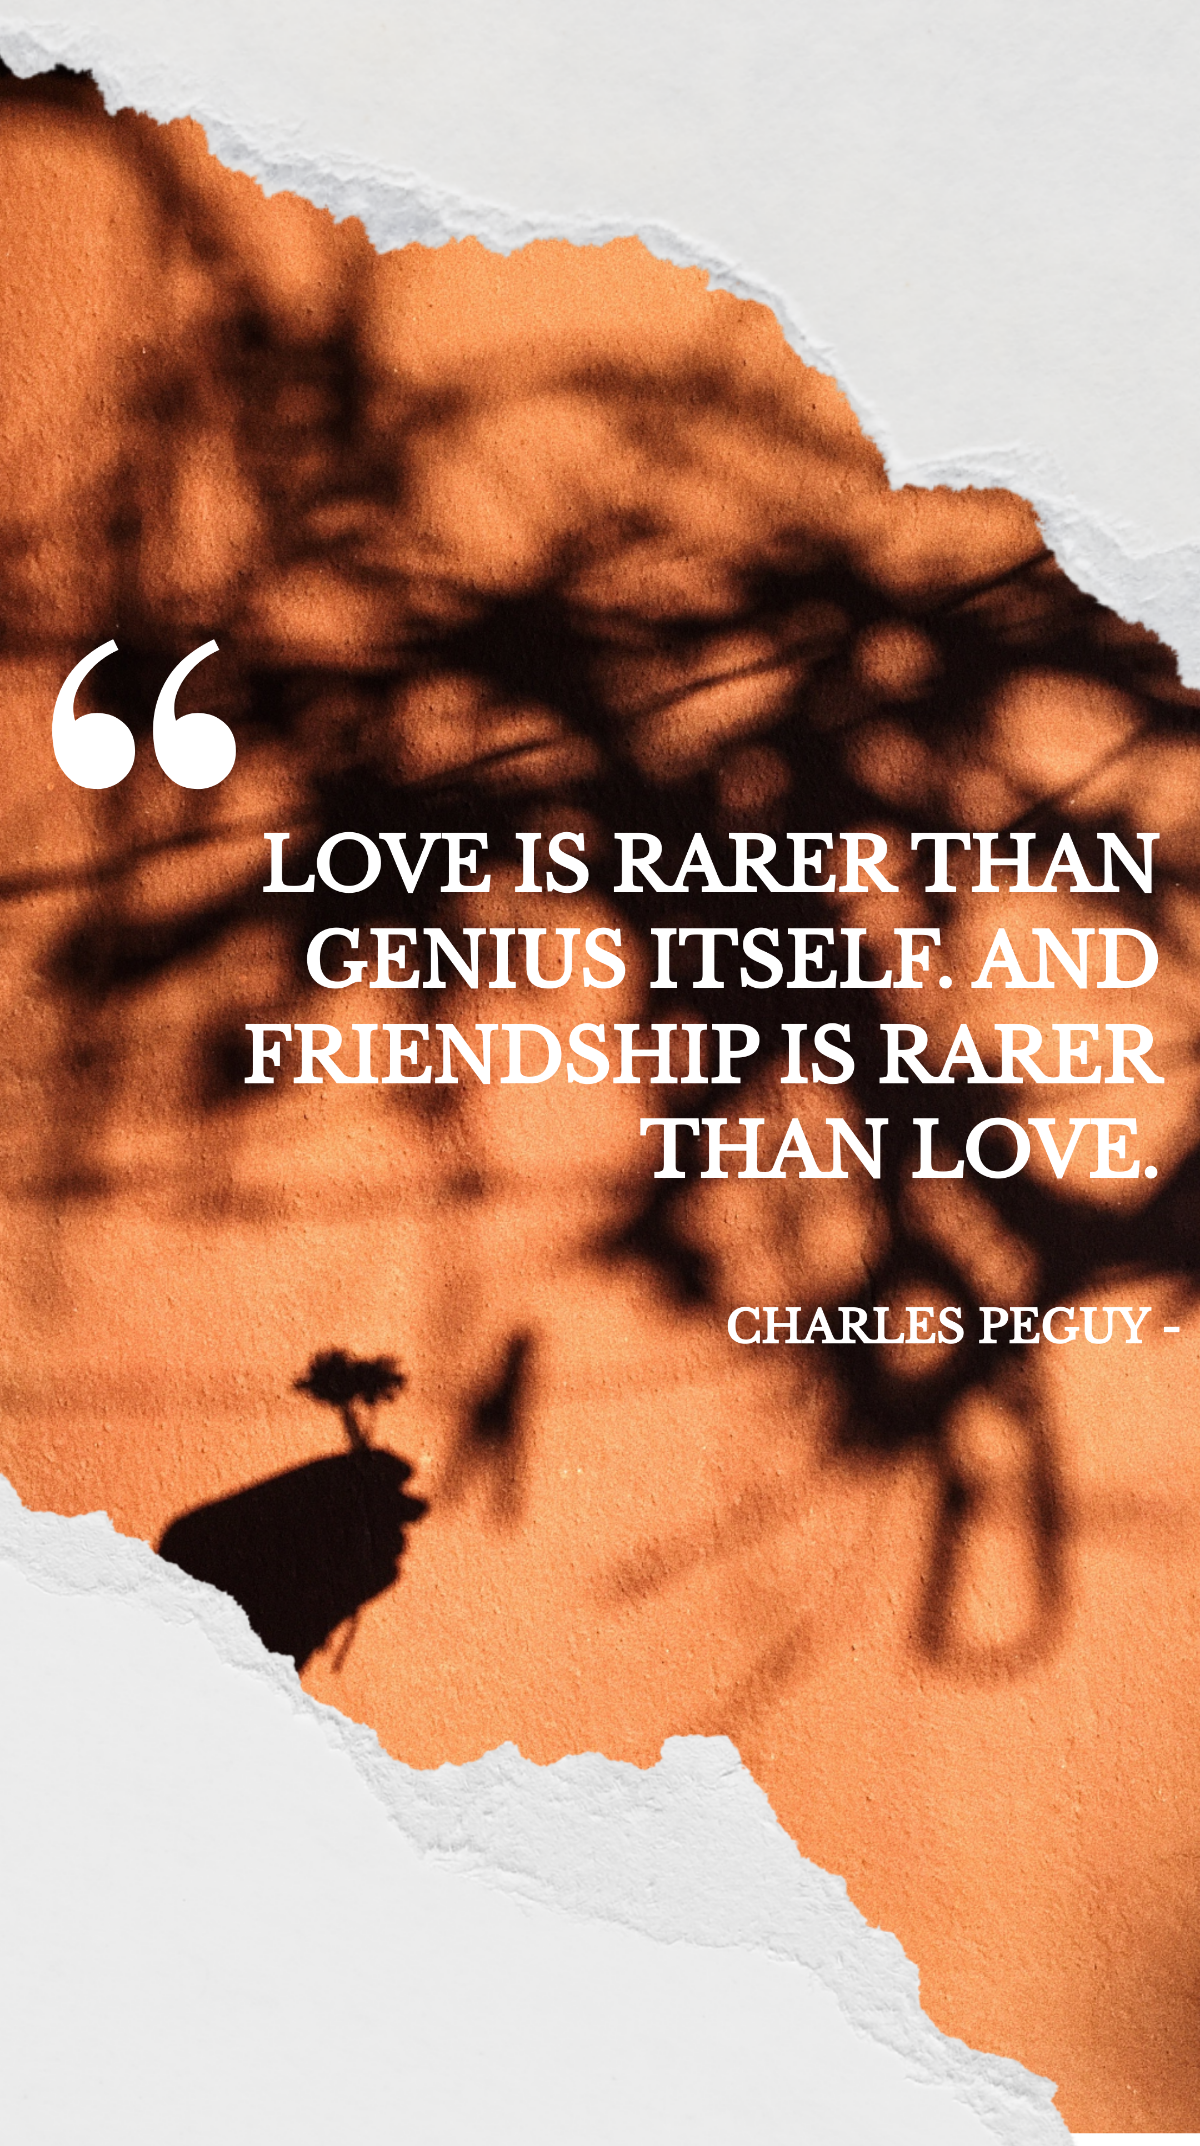 Charles Peguy - Love is rarer than genius itself. And friendship is rarer than love. Template